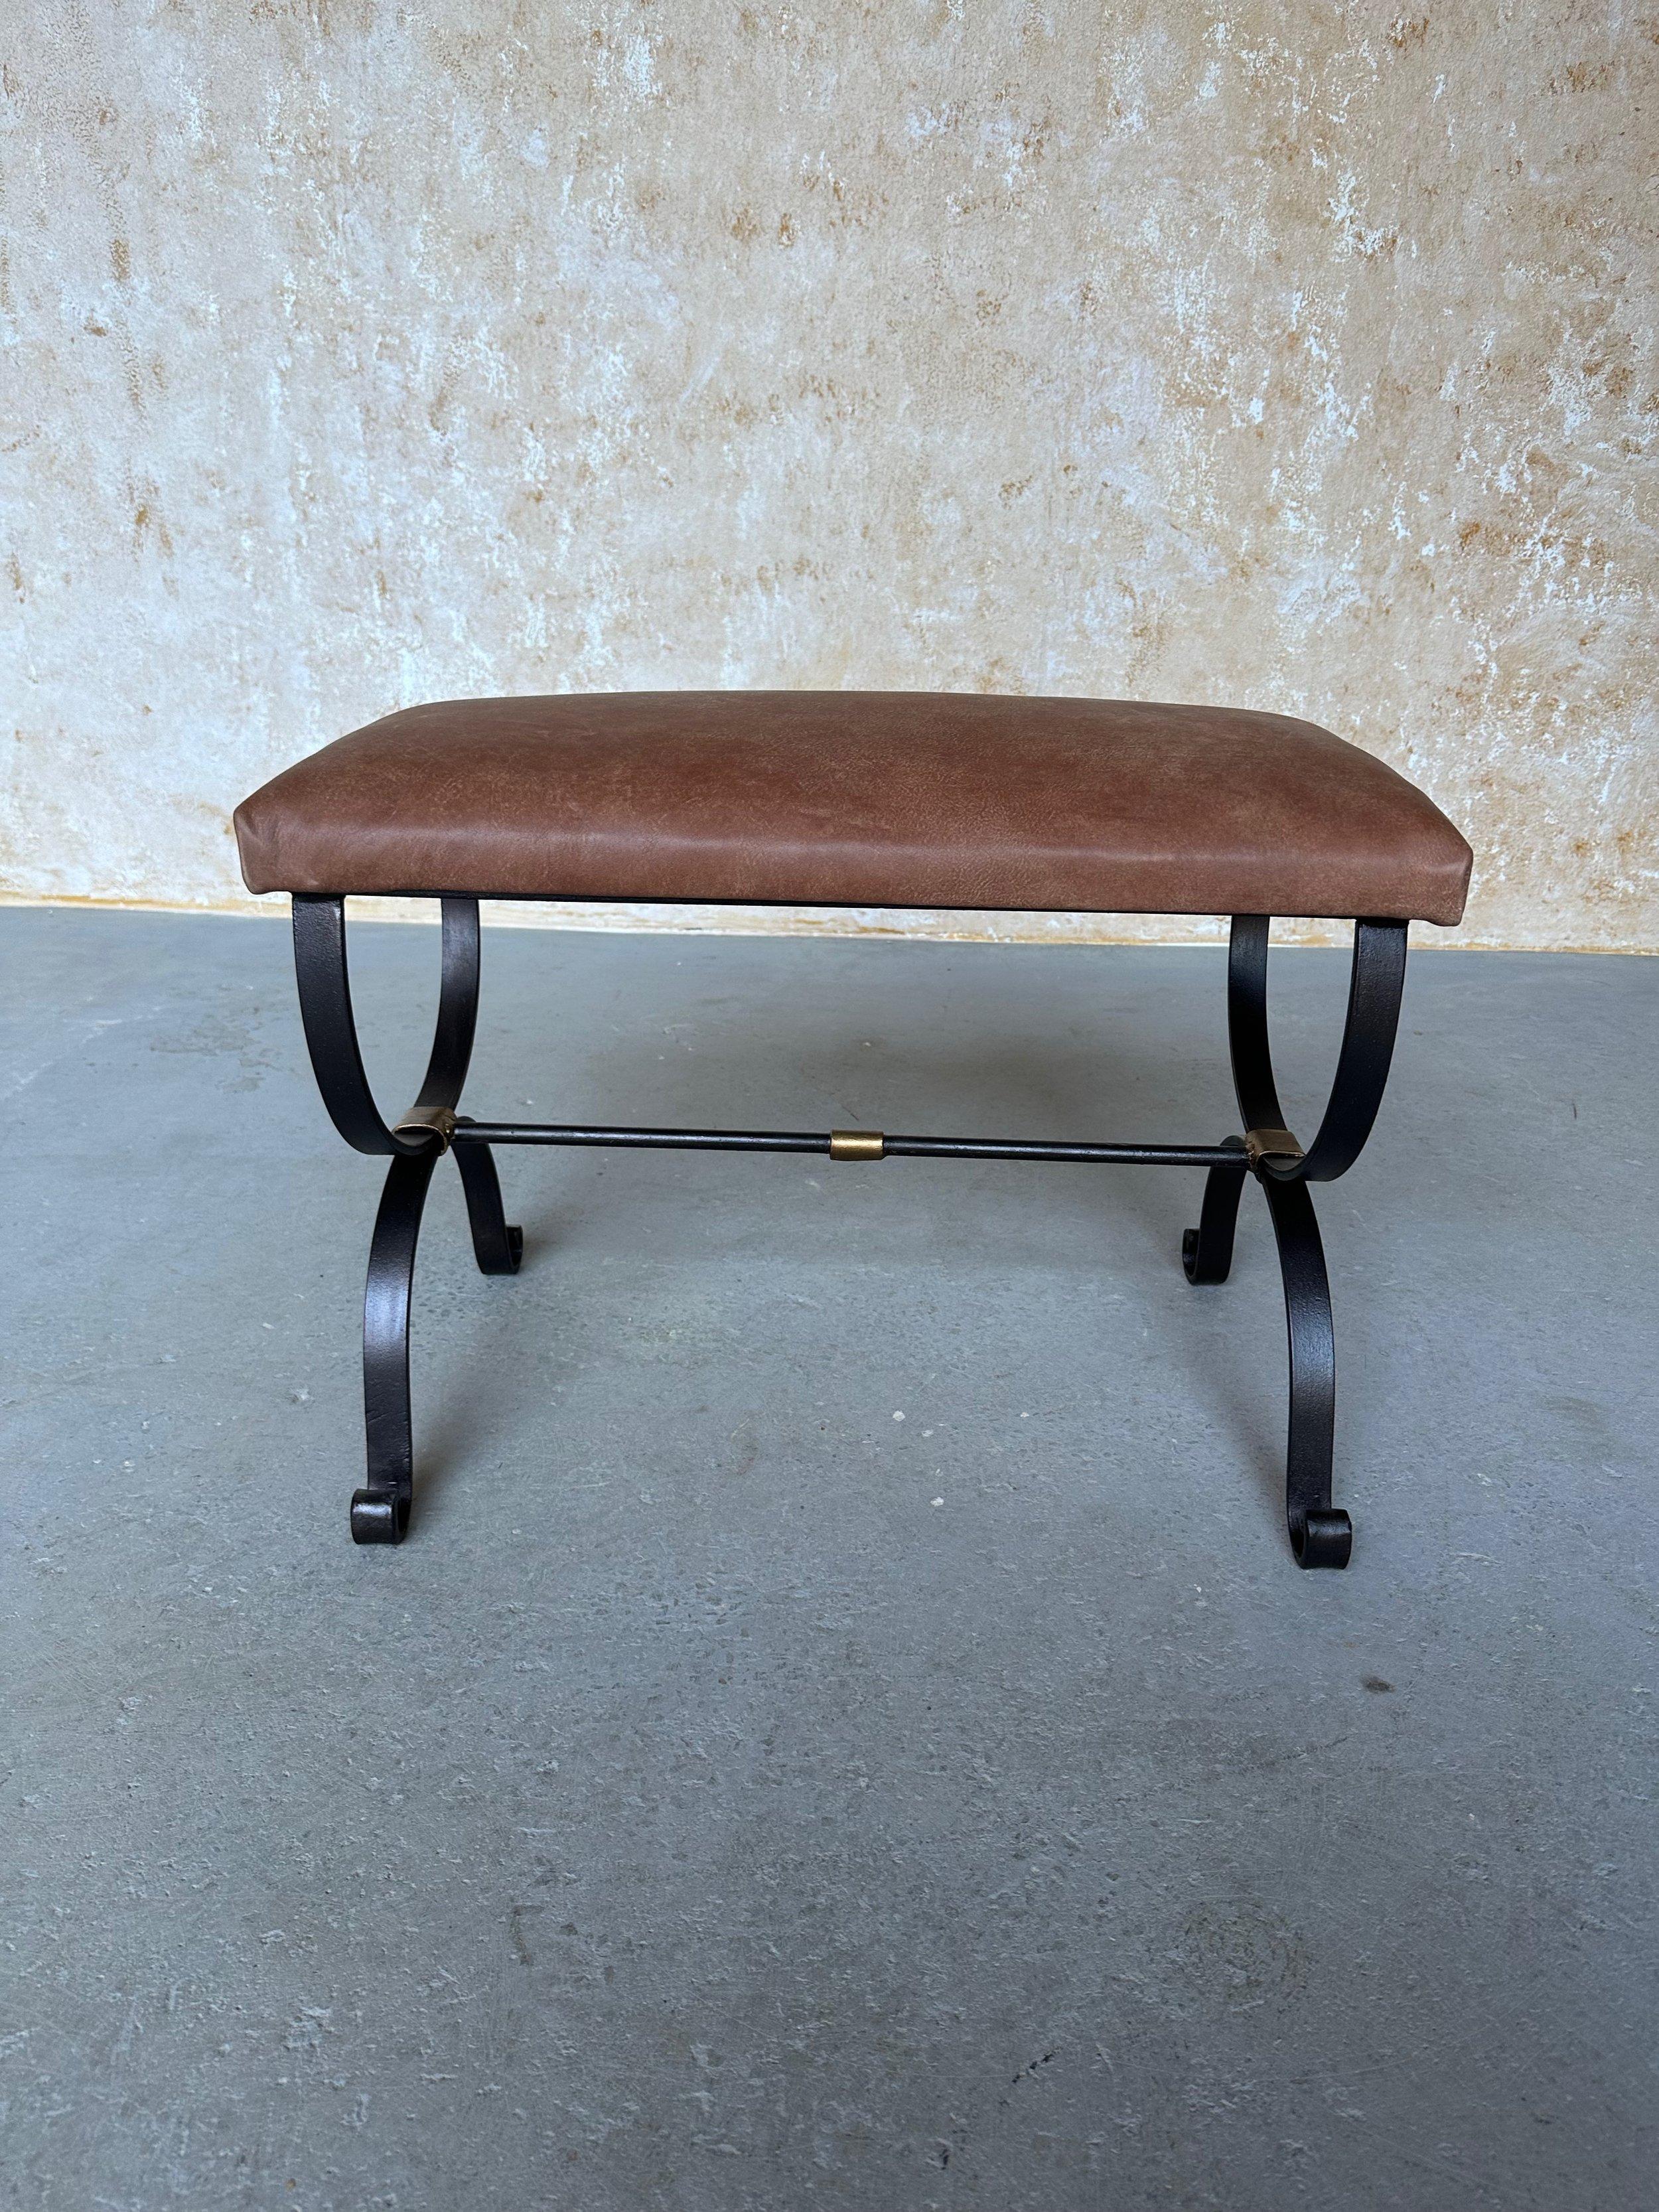 Contemporary Spanish Iron Bench in Brown Leather For Sale